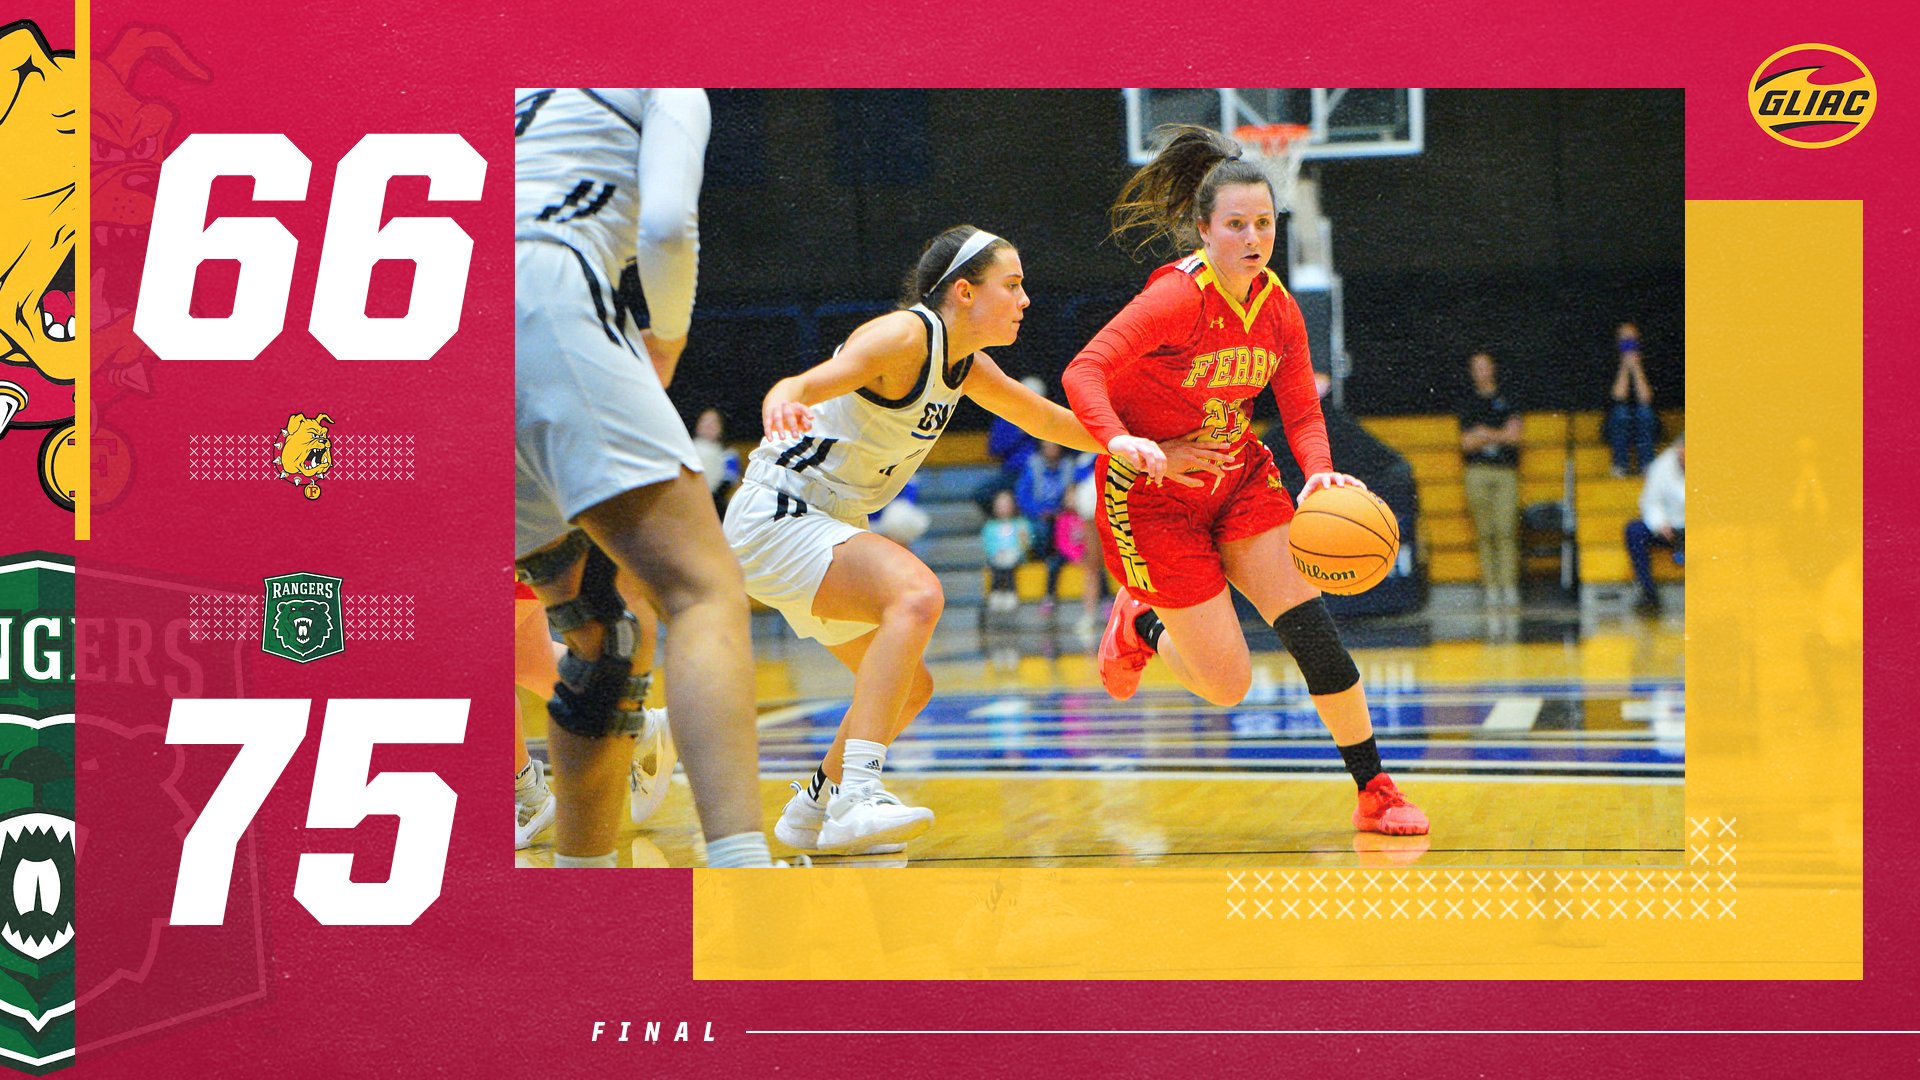 Ferris State Falls To Parkside In Exciting Saturday Afternoon GLIAC Matchup